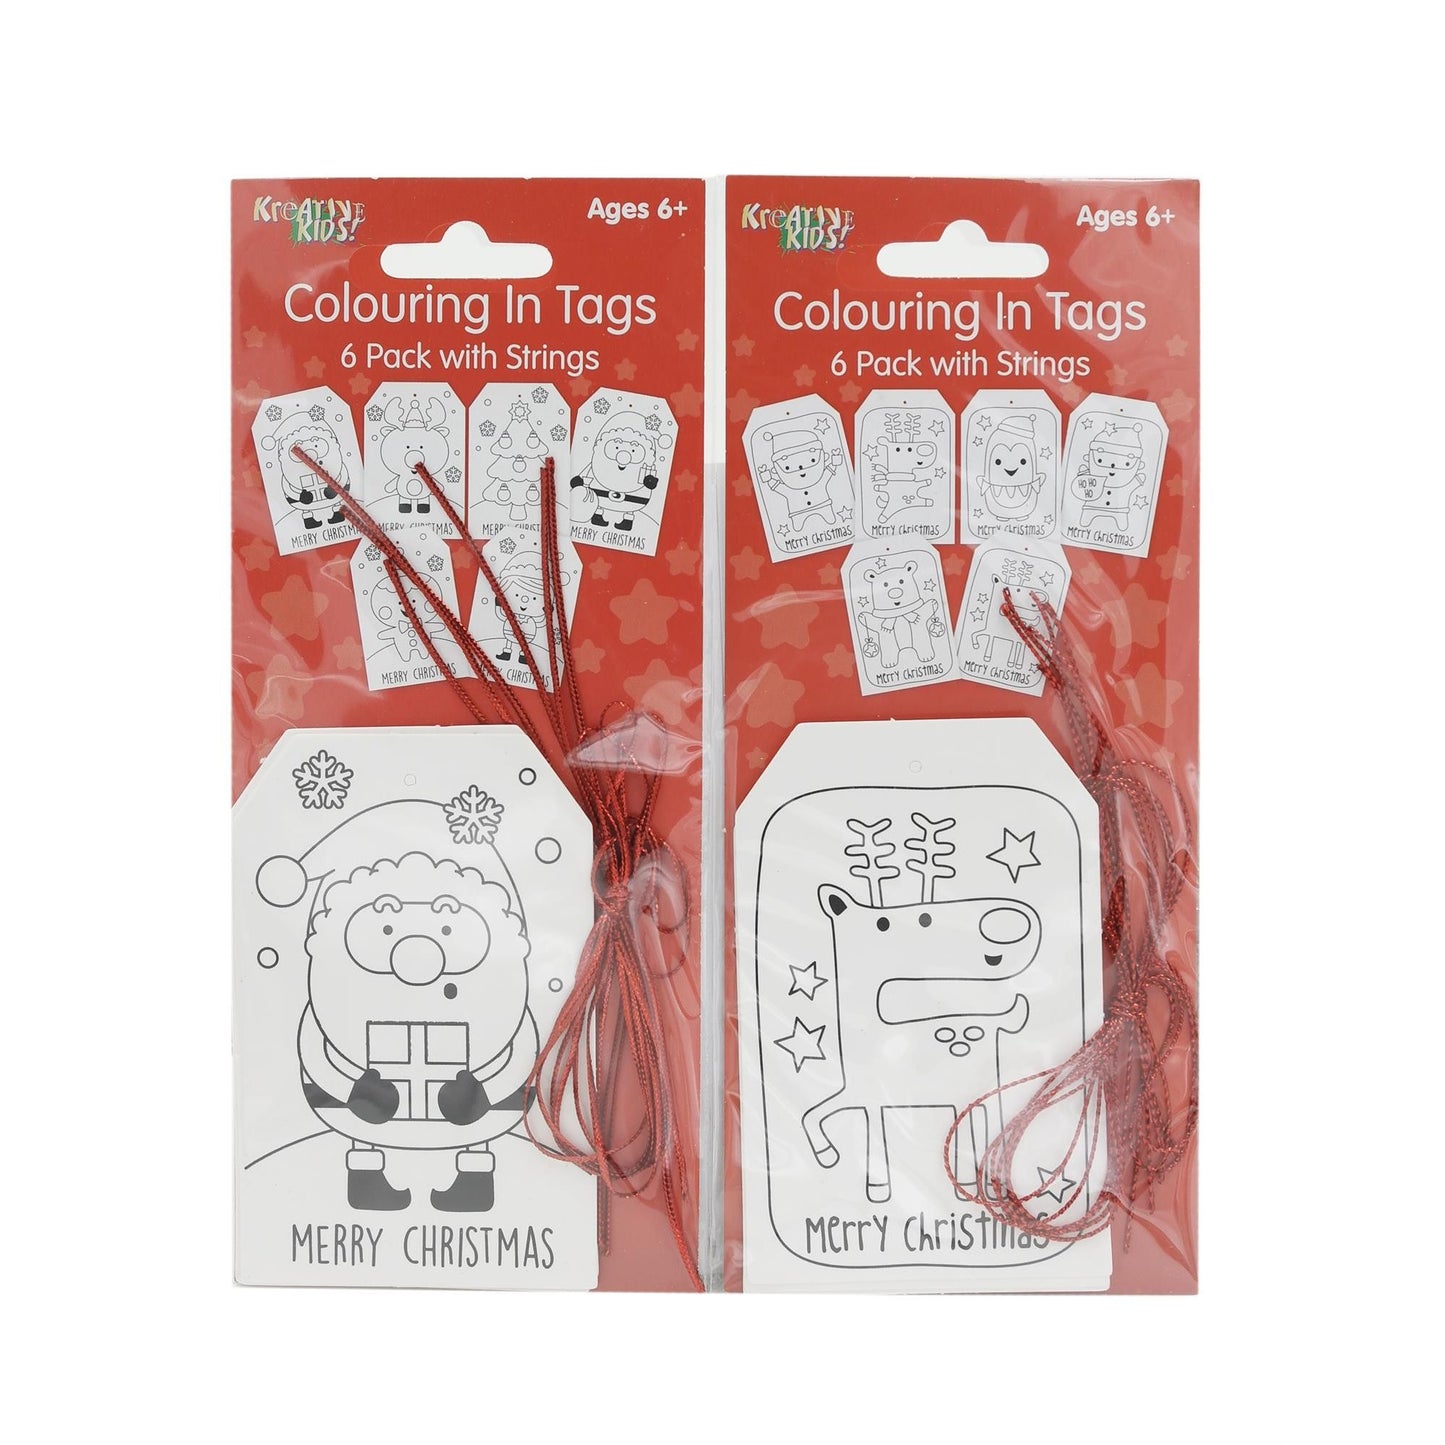 12 Colouring In Christmas Gift Tags